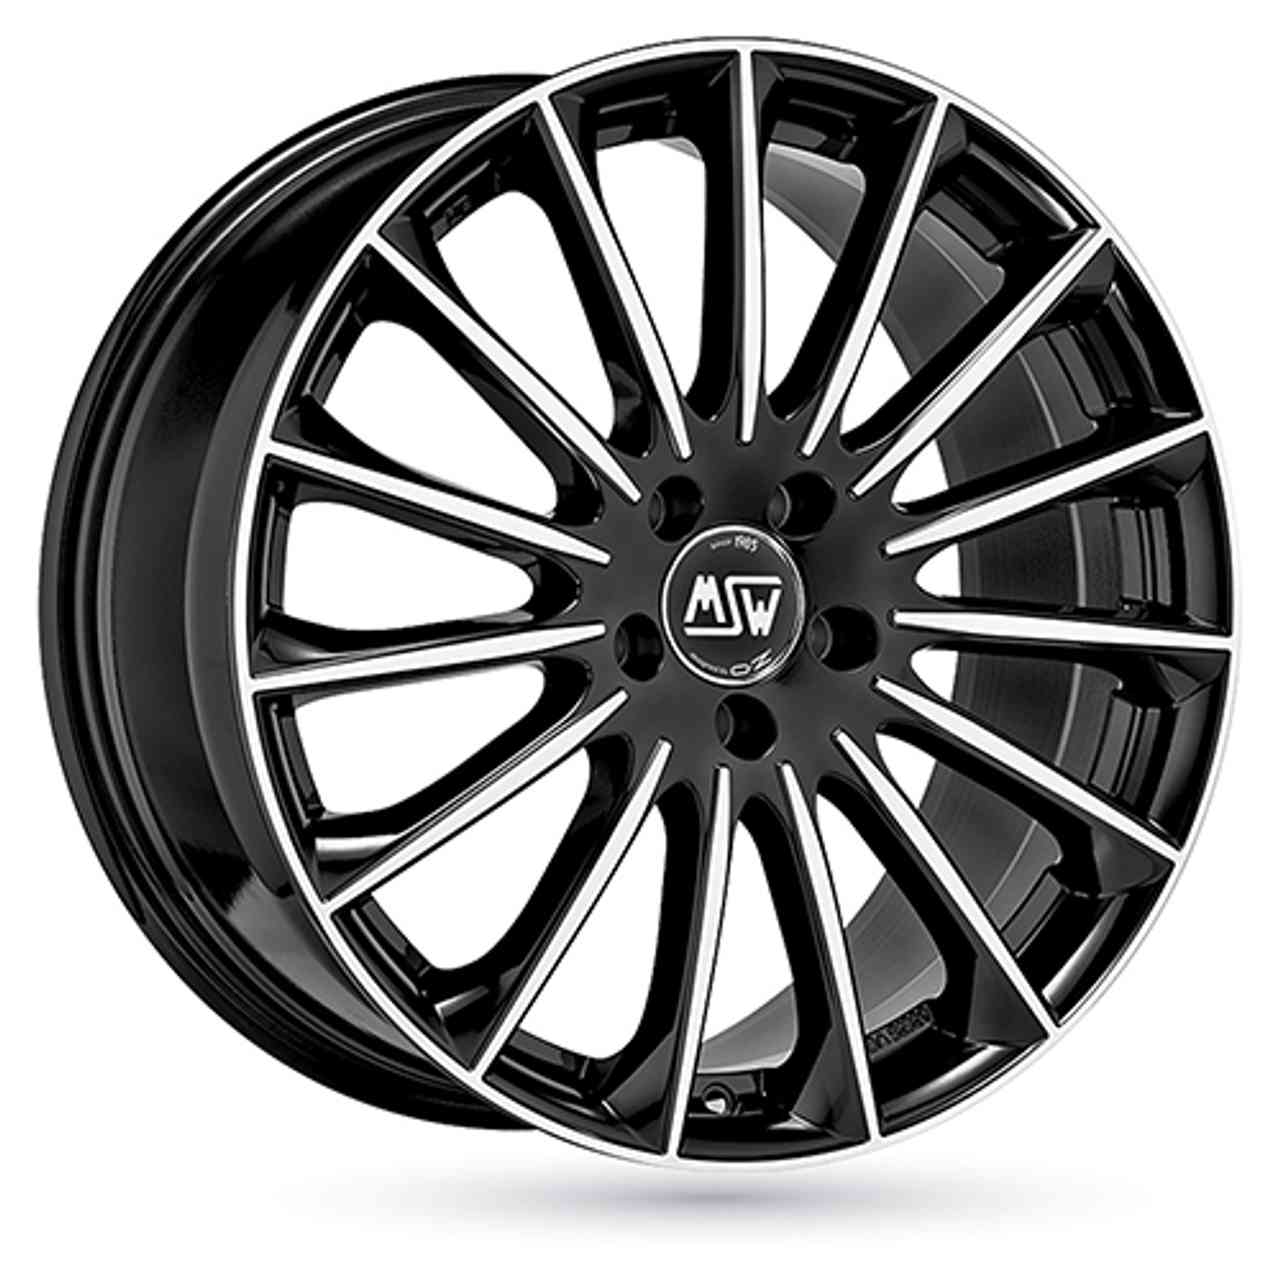 MSW (OZ) MSW 30 gloss black full polished 8.0Jx18 5x112 ET43